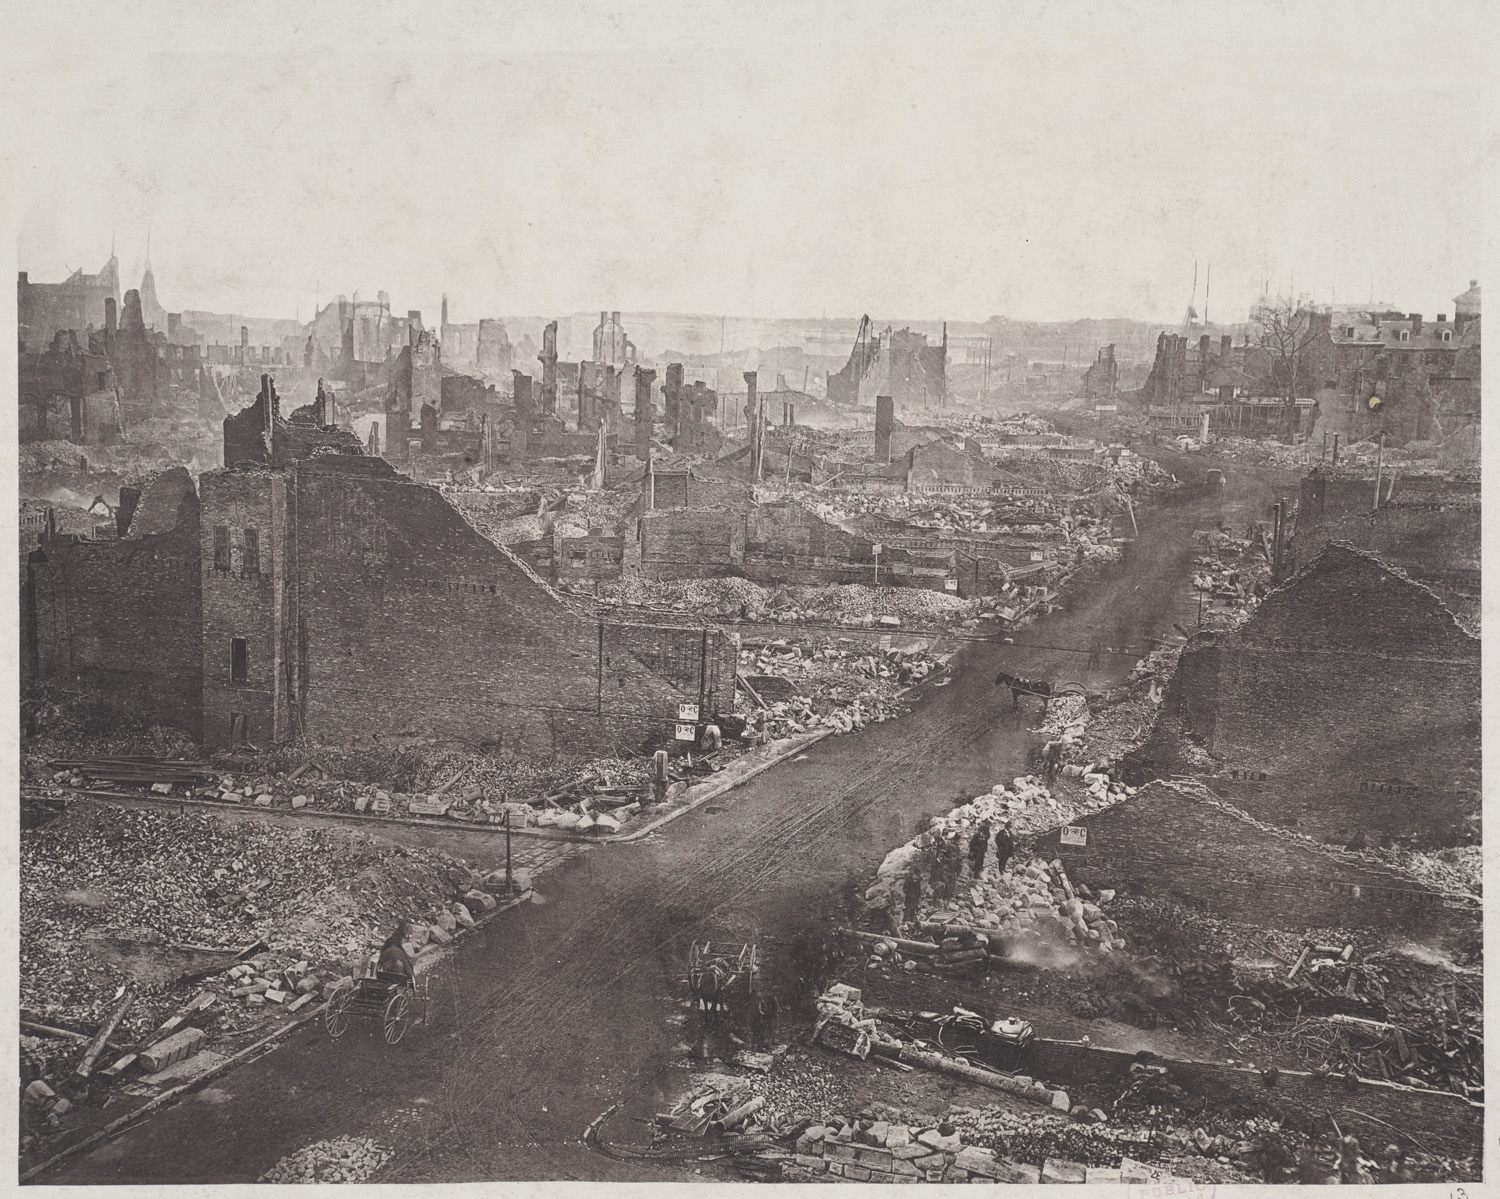 http://fire-truck.ru/wp-content/gallery/velikiy-pozhar-bostona-1872-god/6036338696_6ac637bc26-view-of-boston-in-ruins_-most-likely-after-the-great-fire-of-1872.jpg